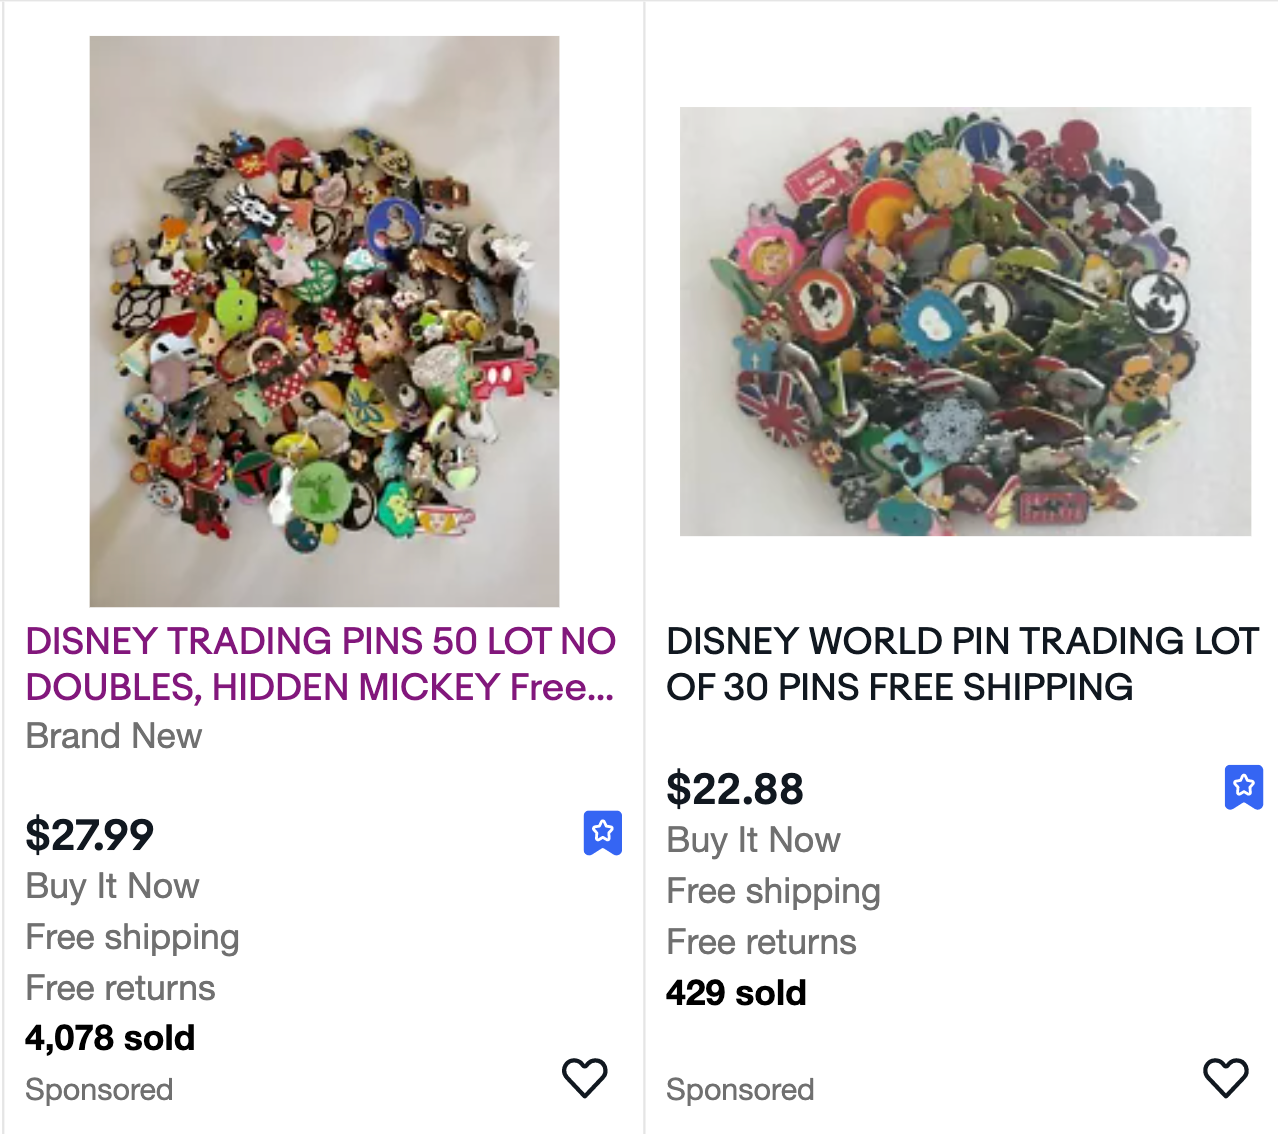 Here's How I Made $3,000 in 2 Months Selling Disney Pins — And